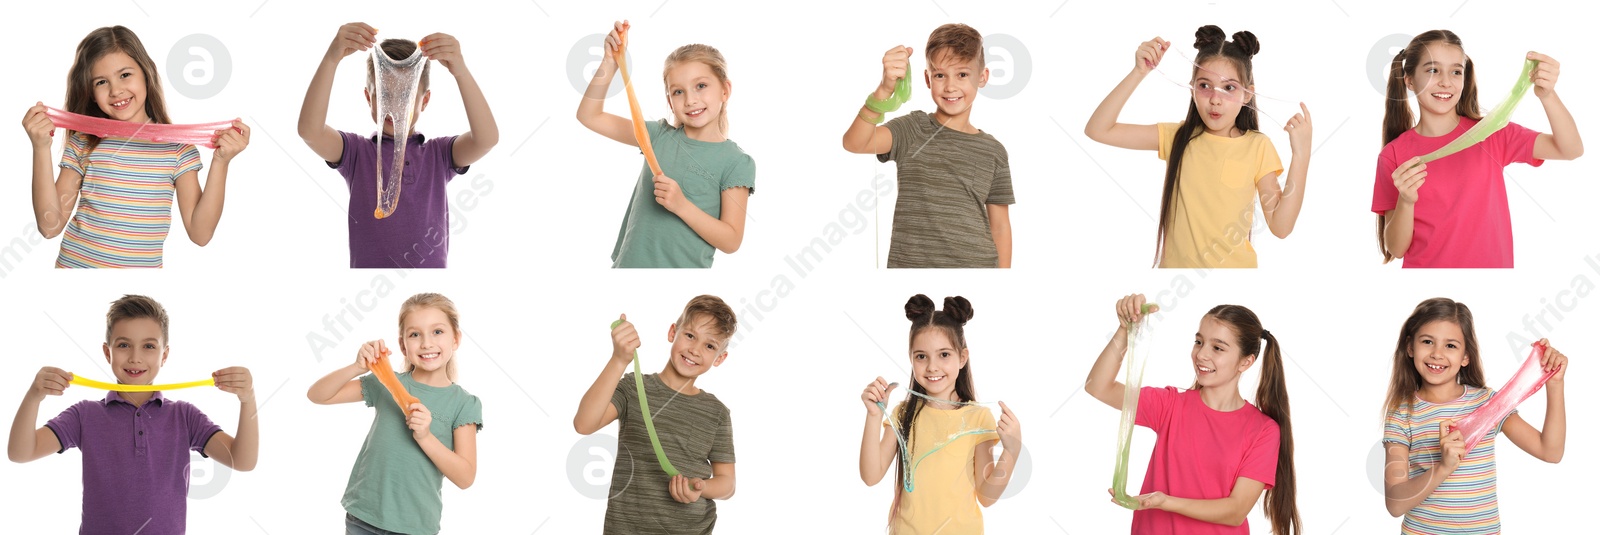 Image of Collage of children with different slimes on white background 